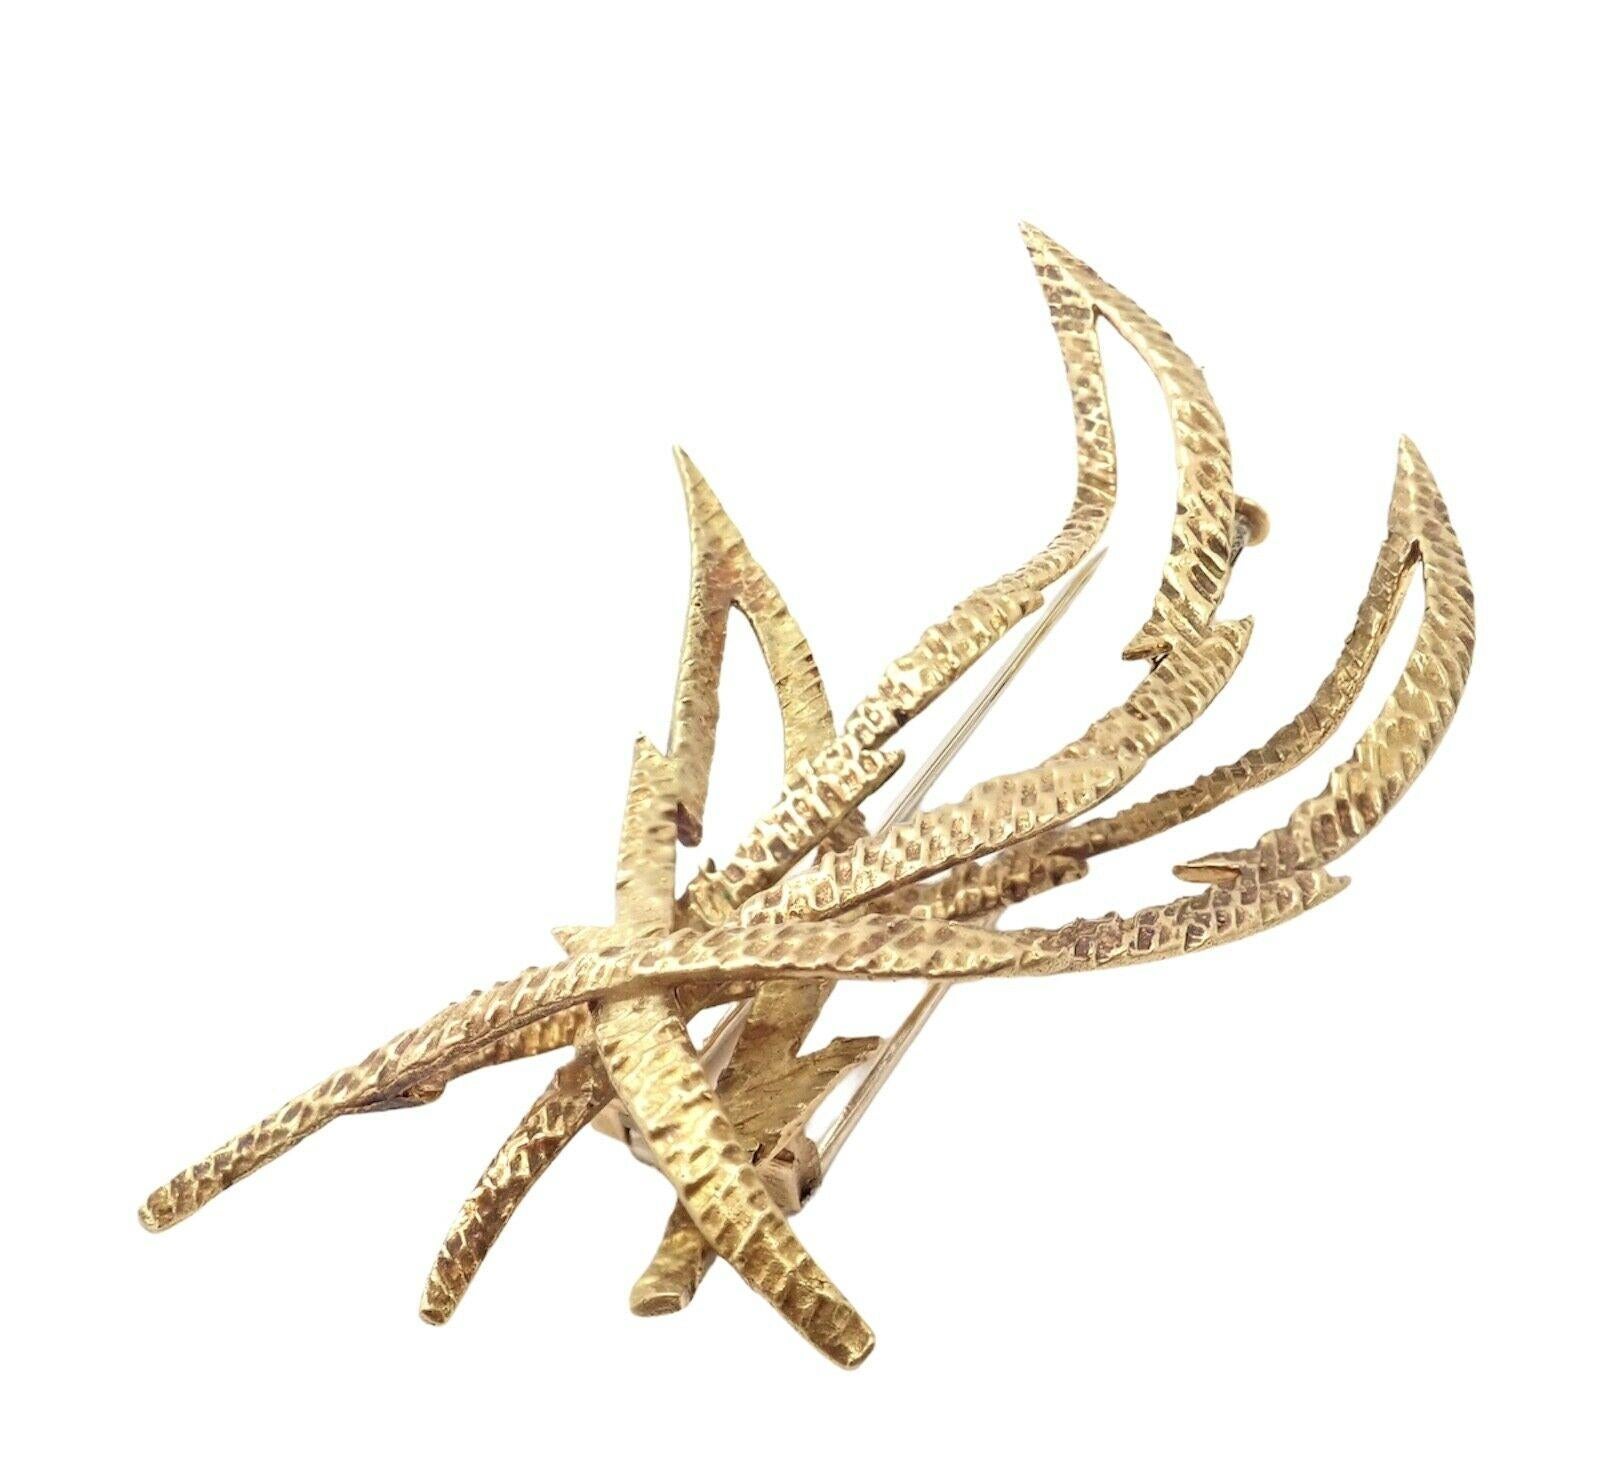 18k Yellow Gold Brooch by Hermes.
Details: 
Measurements: 42mm x 67mm
Weight: 16.6 grams
Stamped Hallmarks: Hermes Paris French Assay Mark for 18k Gold 84107 
*Free Shipping within the United States*
YOUR PRICE: $6,250
2716ohld